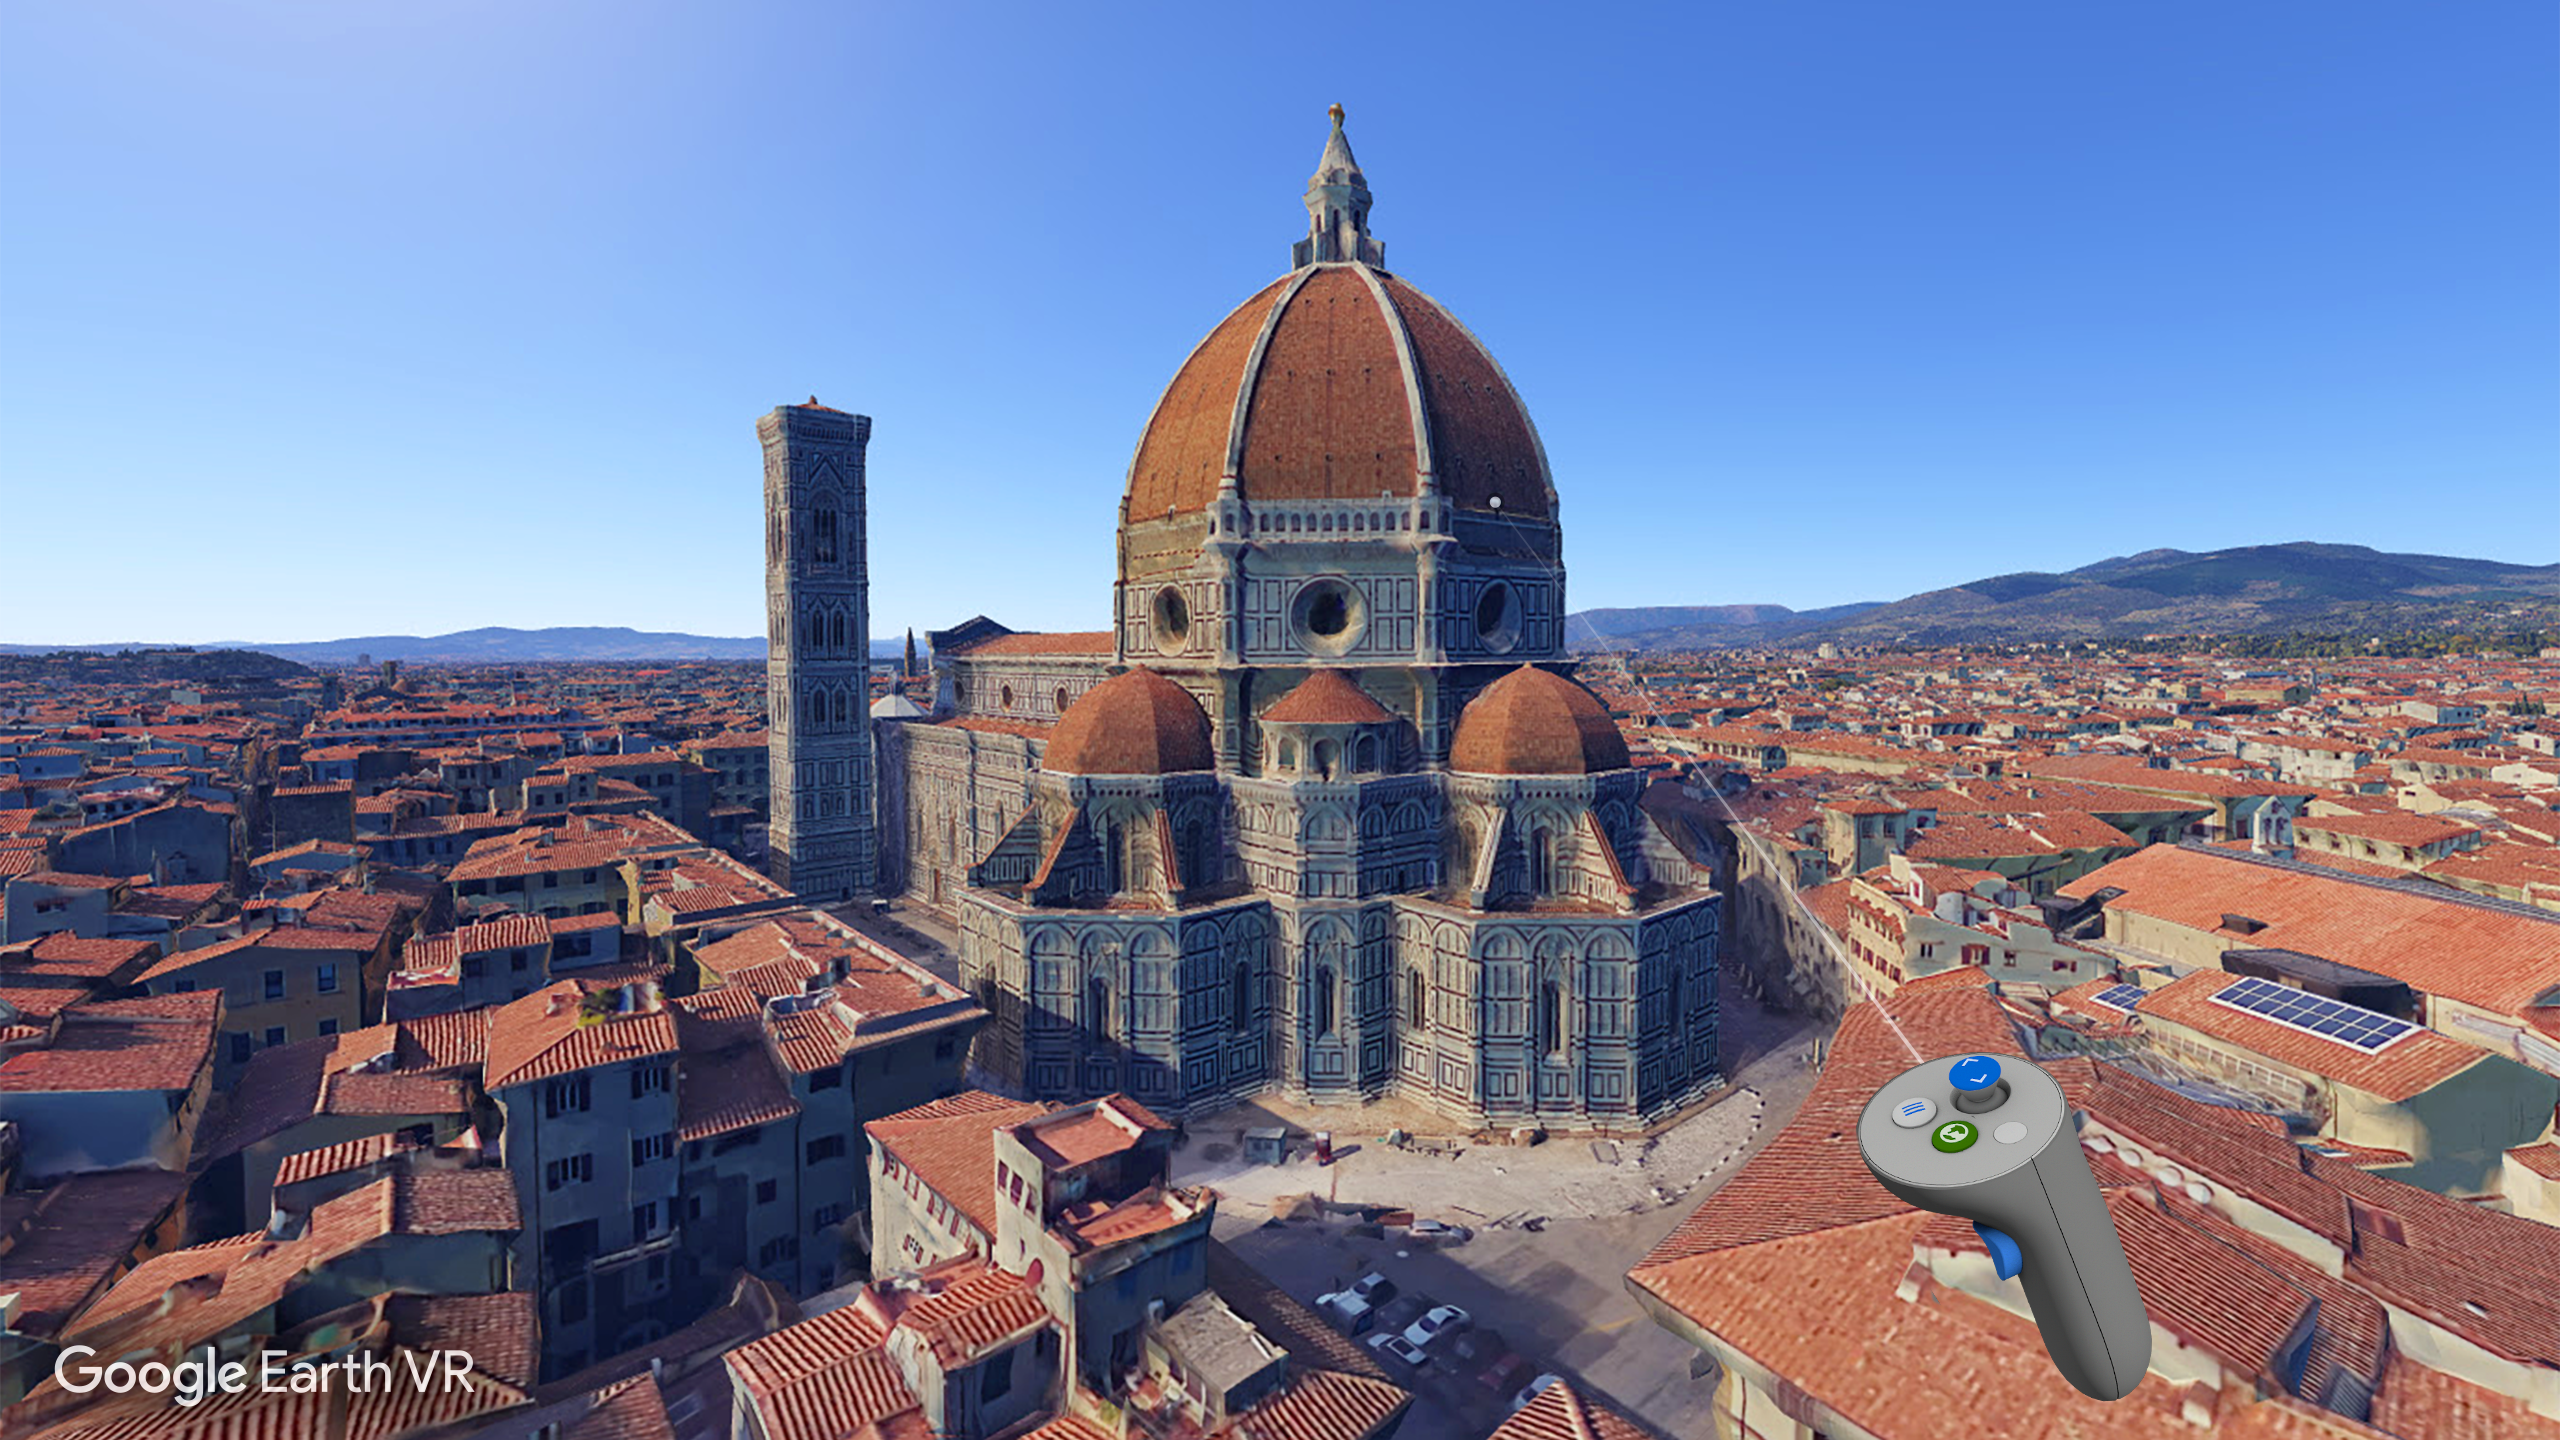 Google Earth VR Adds Search and Oculus Support